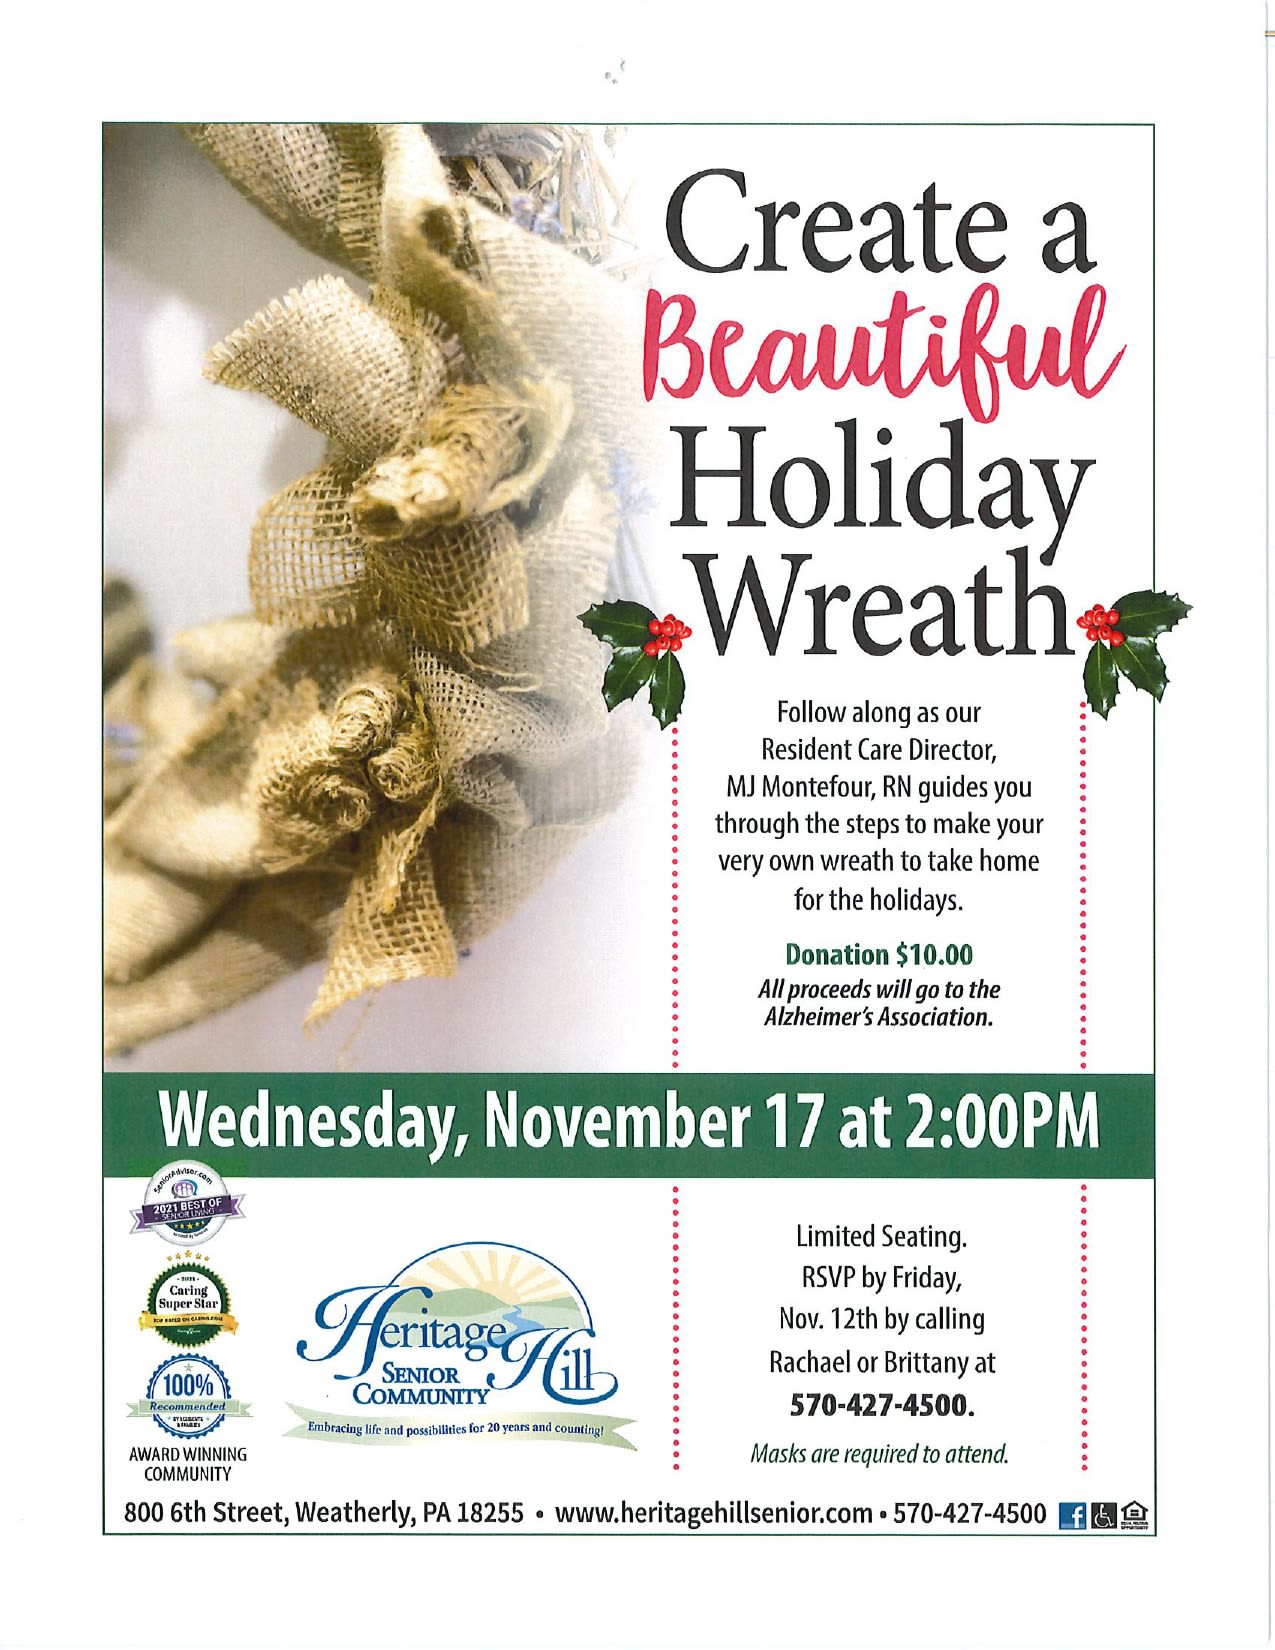 Create a wreath flyer for Heritage Hill Senior Community